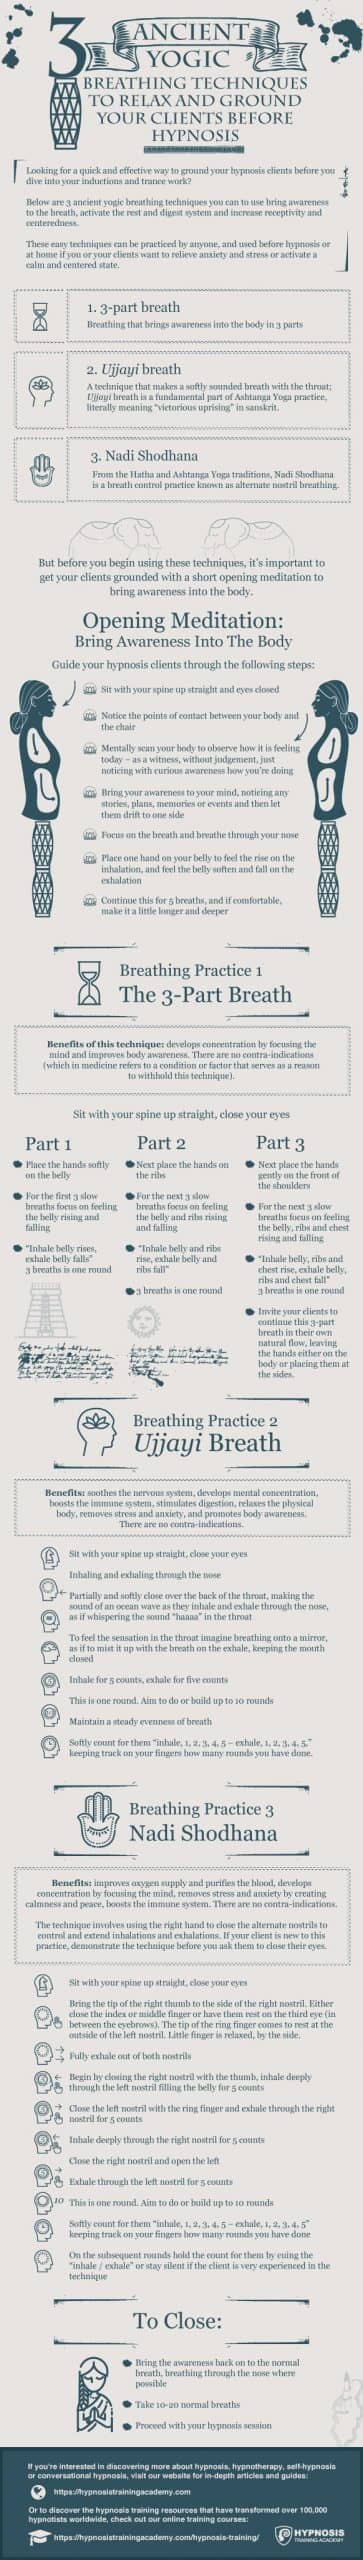 [INFOGRAPHIC] Yogic Breathing For Hypnosis: 3 Easy Techniques To Ground & Relax Your Clients Before Inducing A Hypnotic Trance